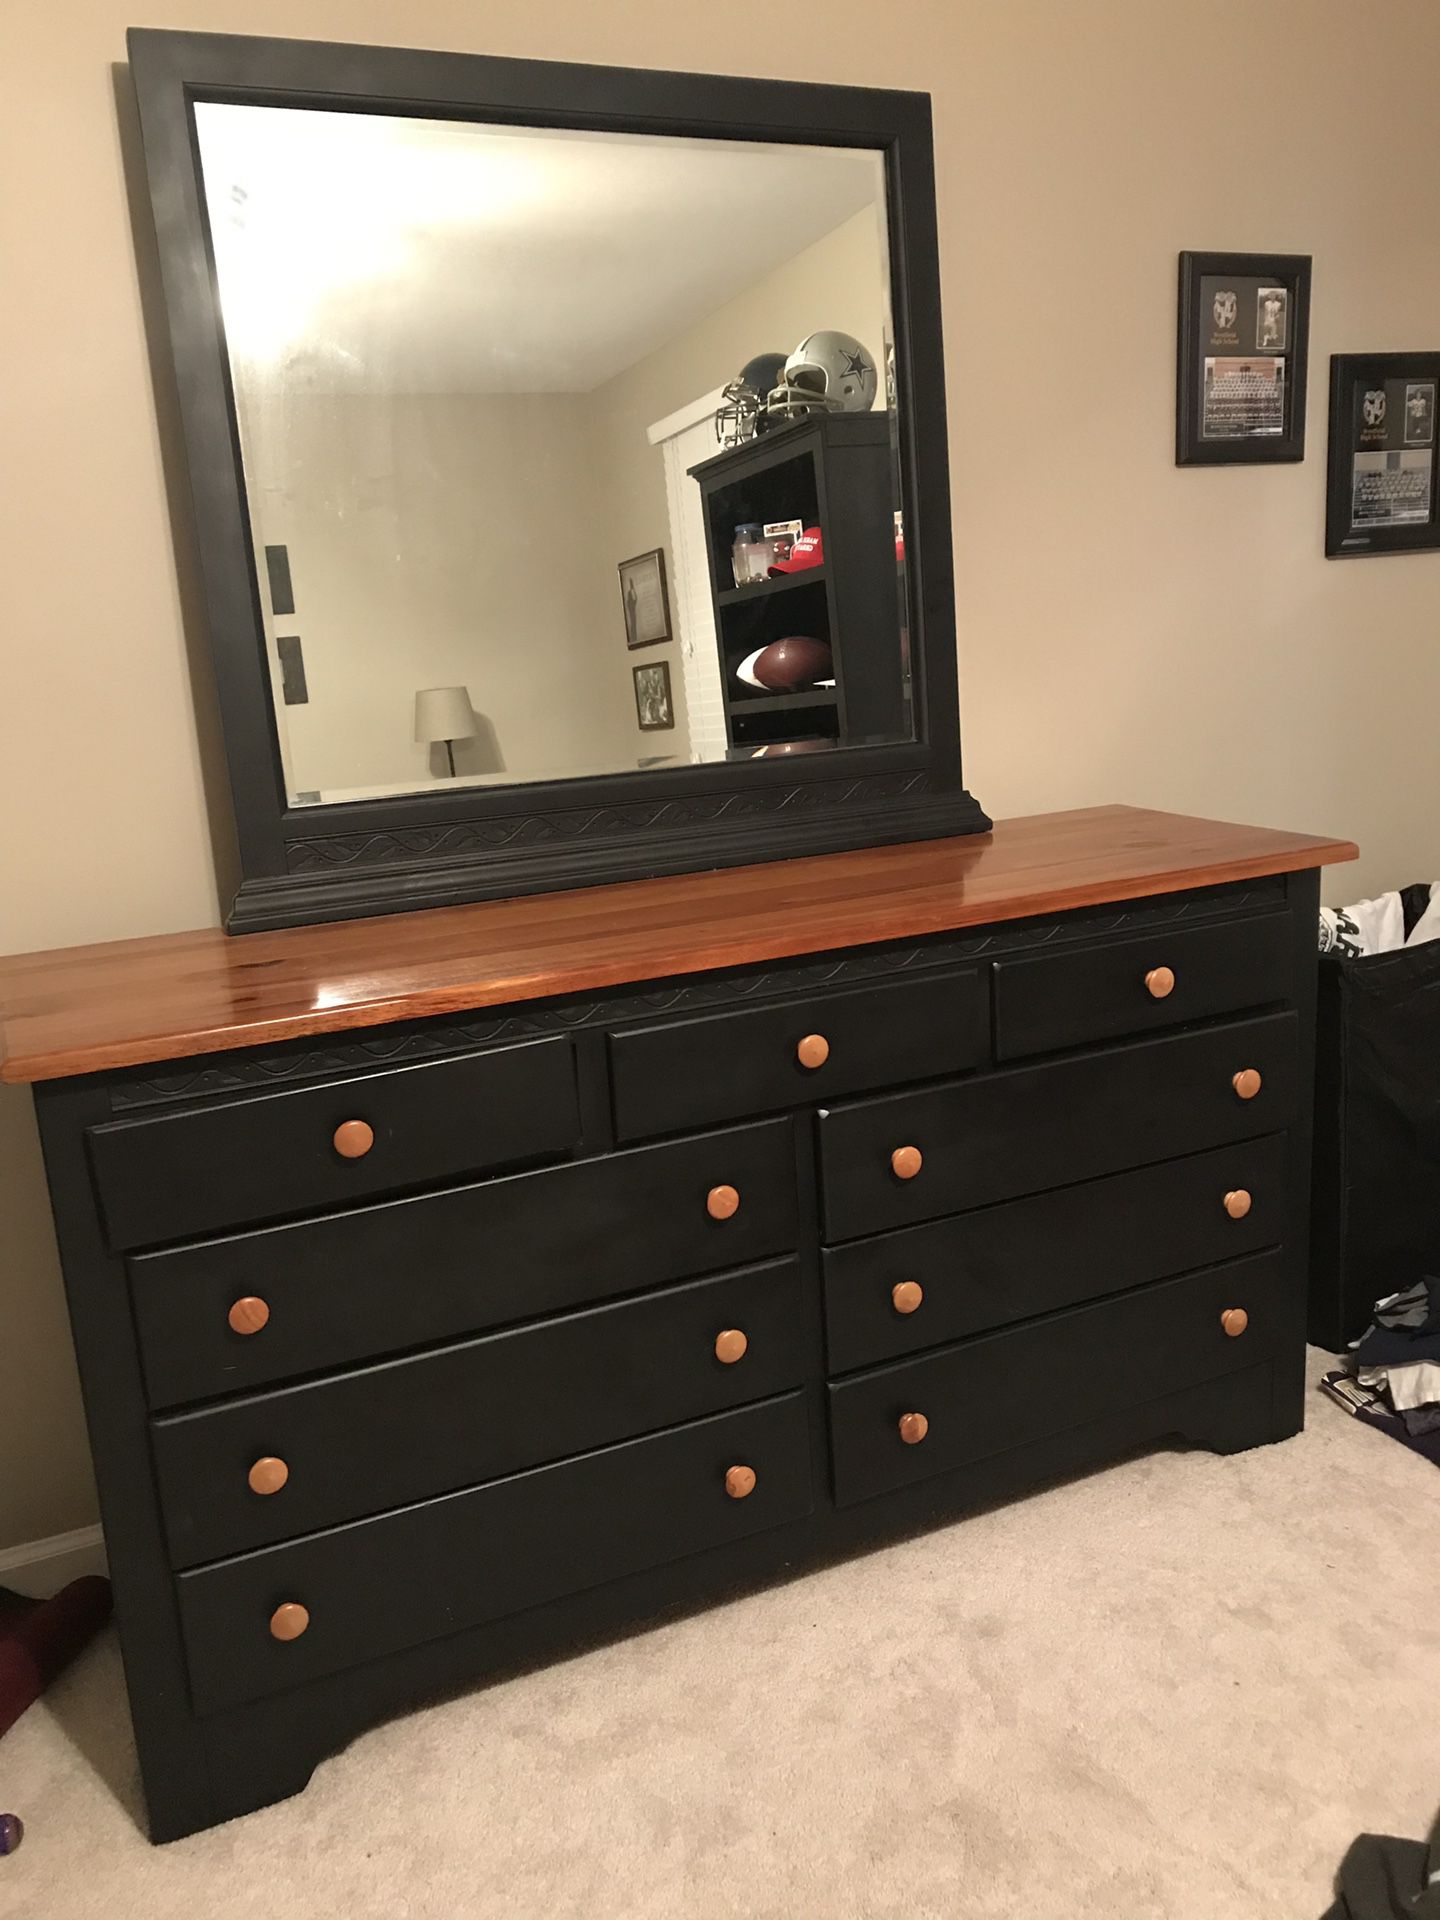 Dresser with mirror and nightstand